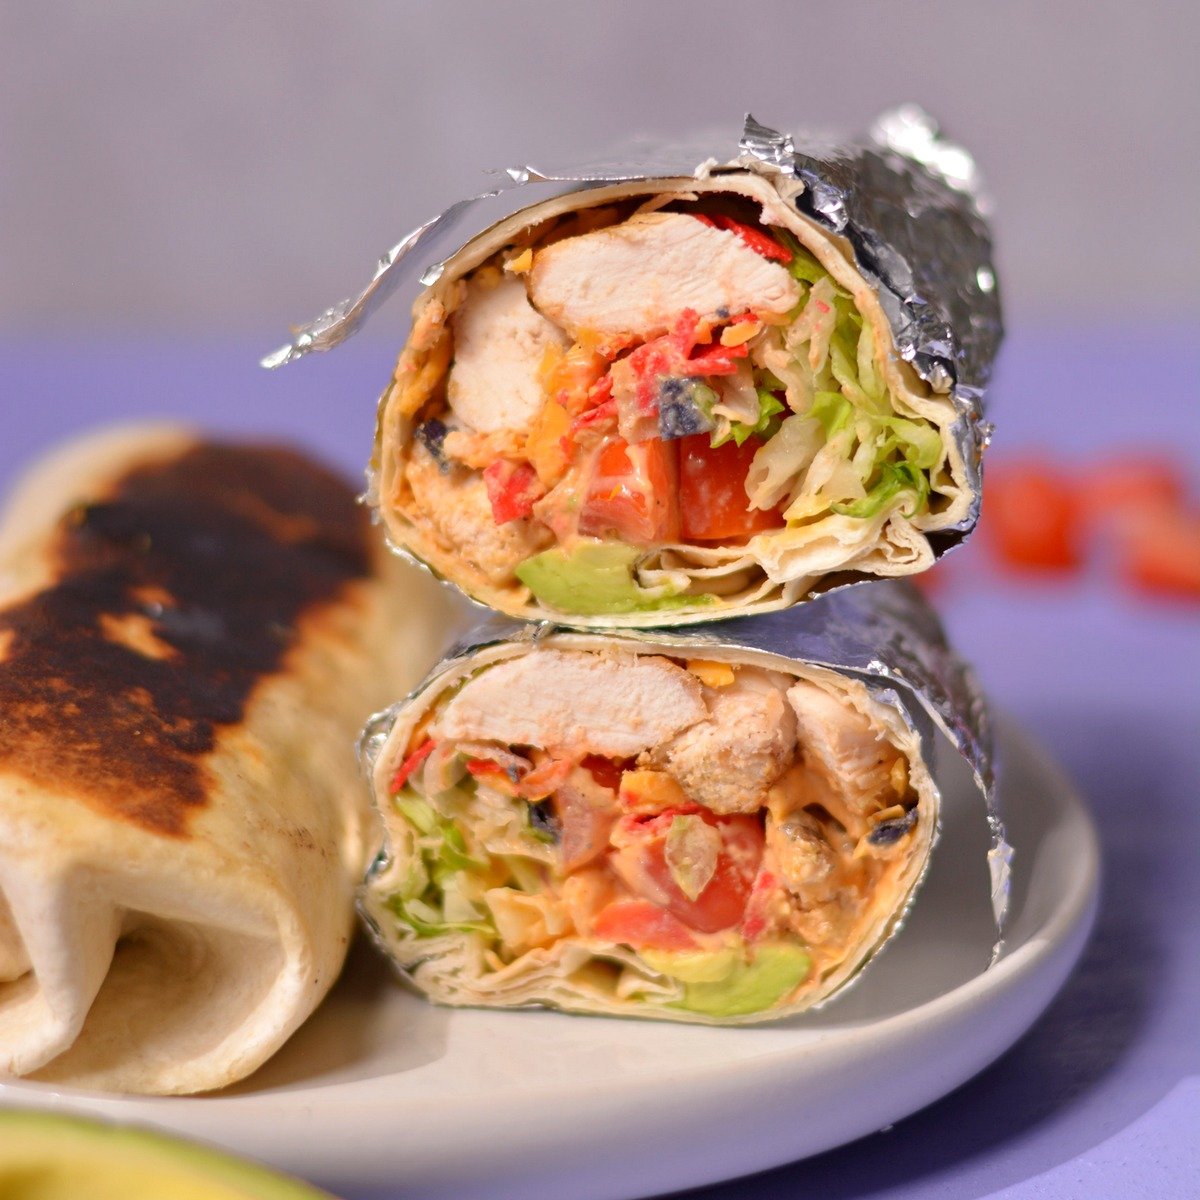 Two burritos side by side, one cut open to show the filling ingredients and one toasted to golden brown.